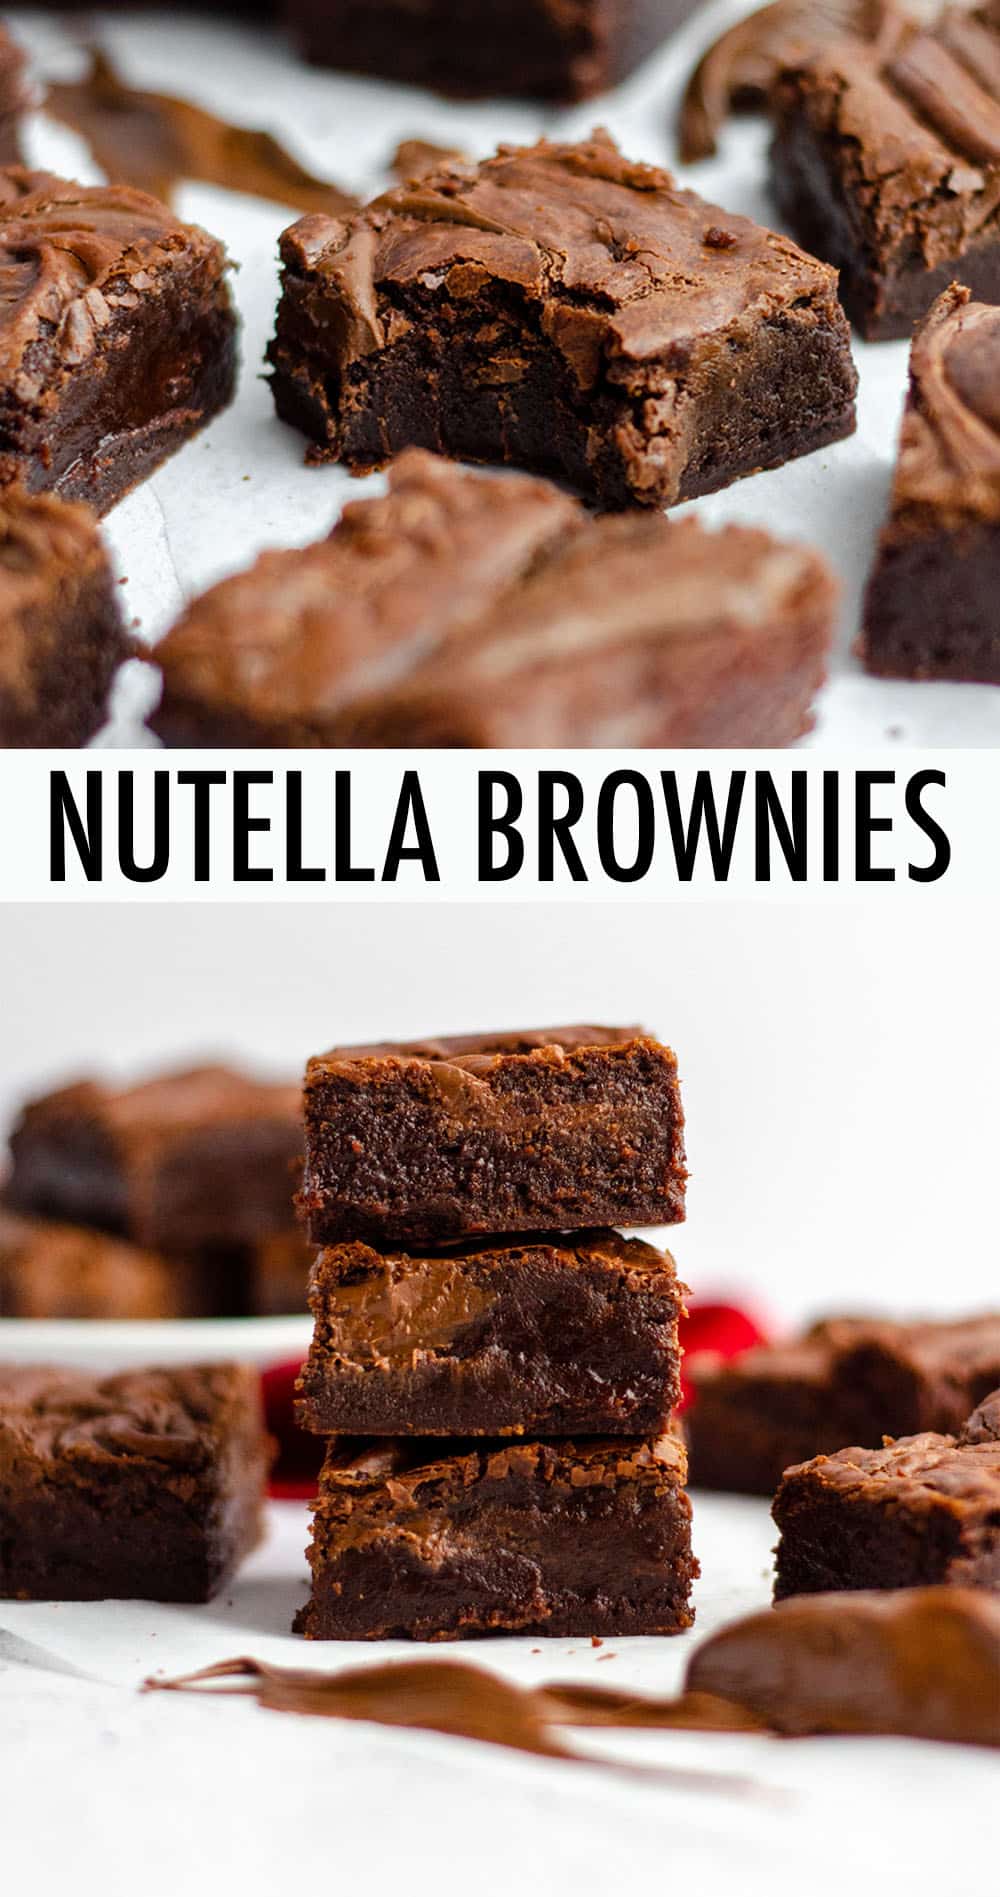 These seriously dense and fudgy Nutella brownies have Nutella blended right in the batter and swirled into the top. They are a chocolate lovers' dream! via @frshaprilflours